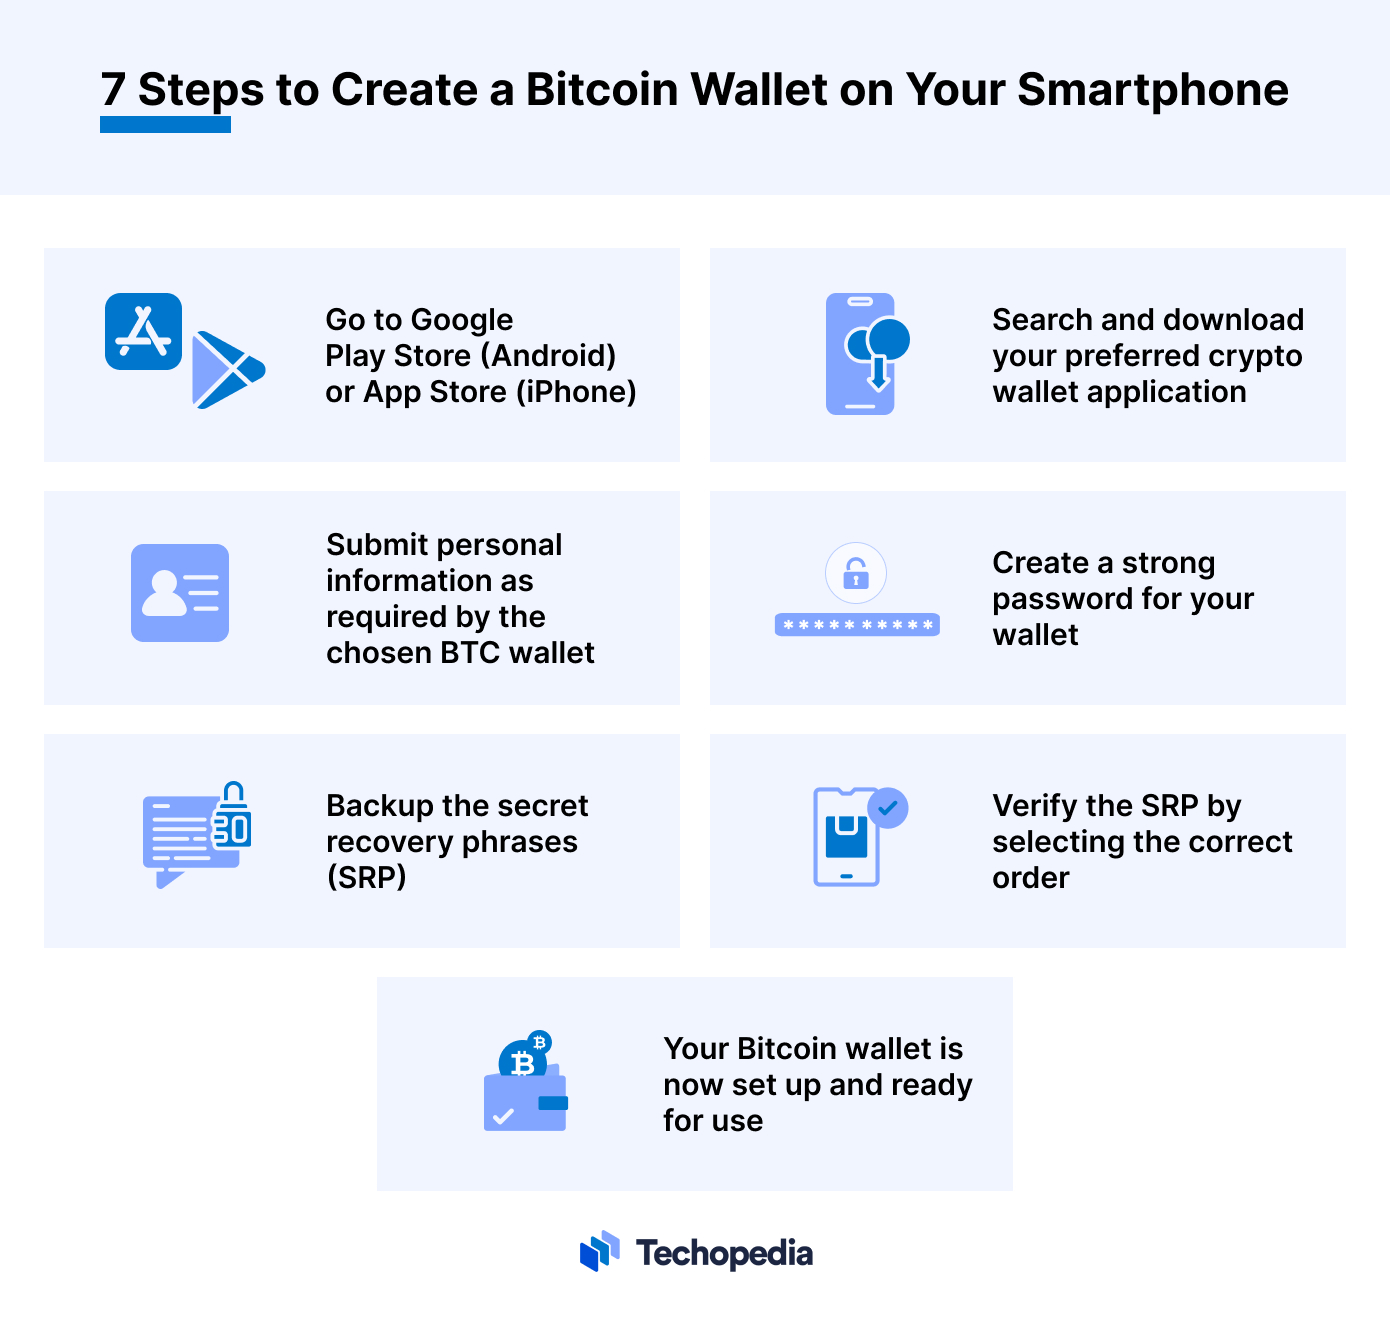 7 Steps to Create a Bitcoin Wallet on Your Smartphone